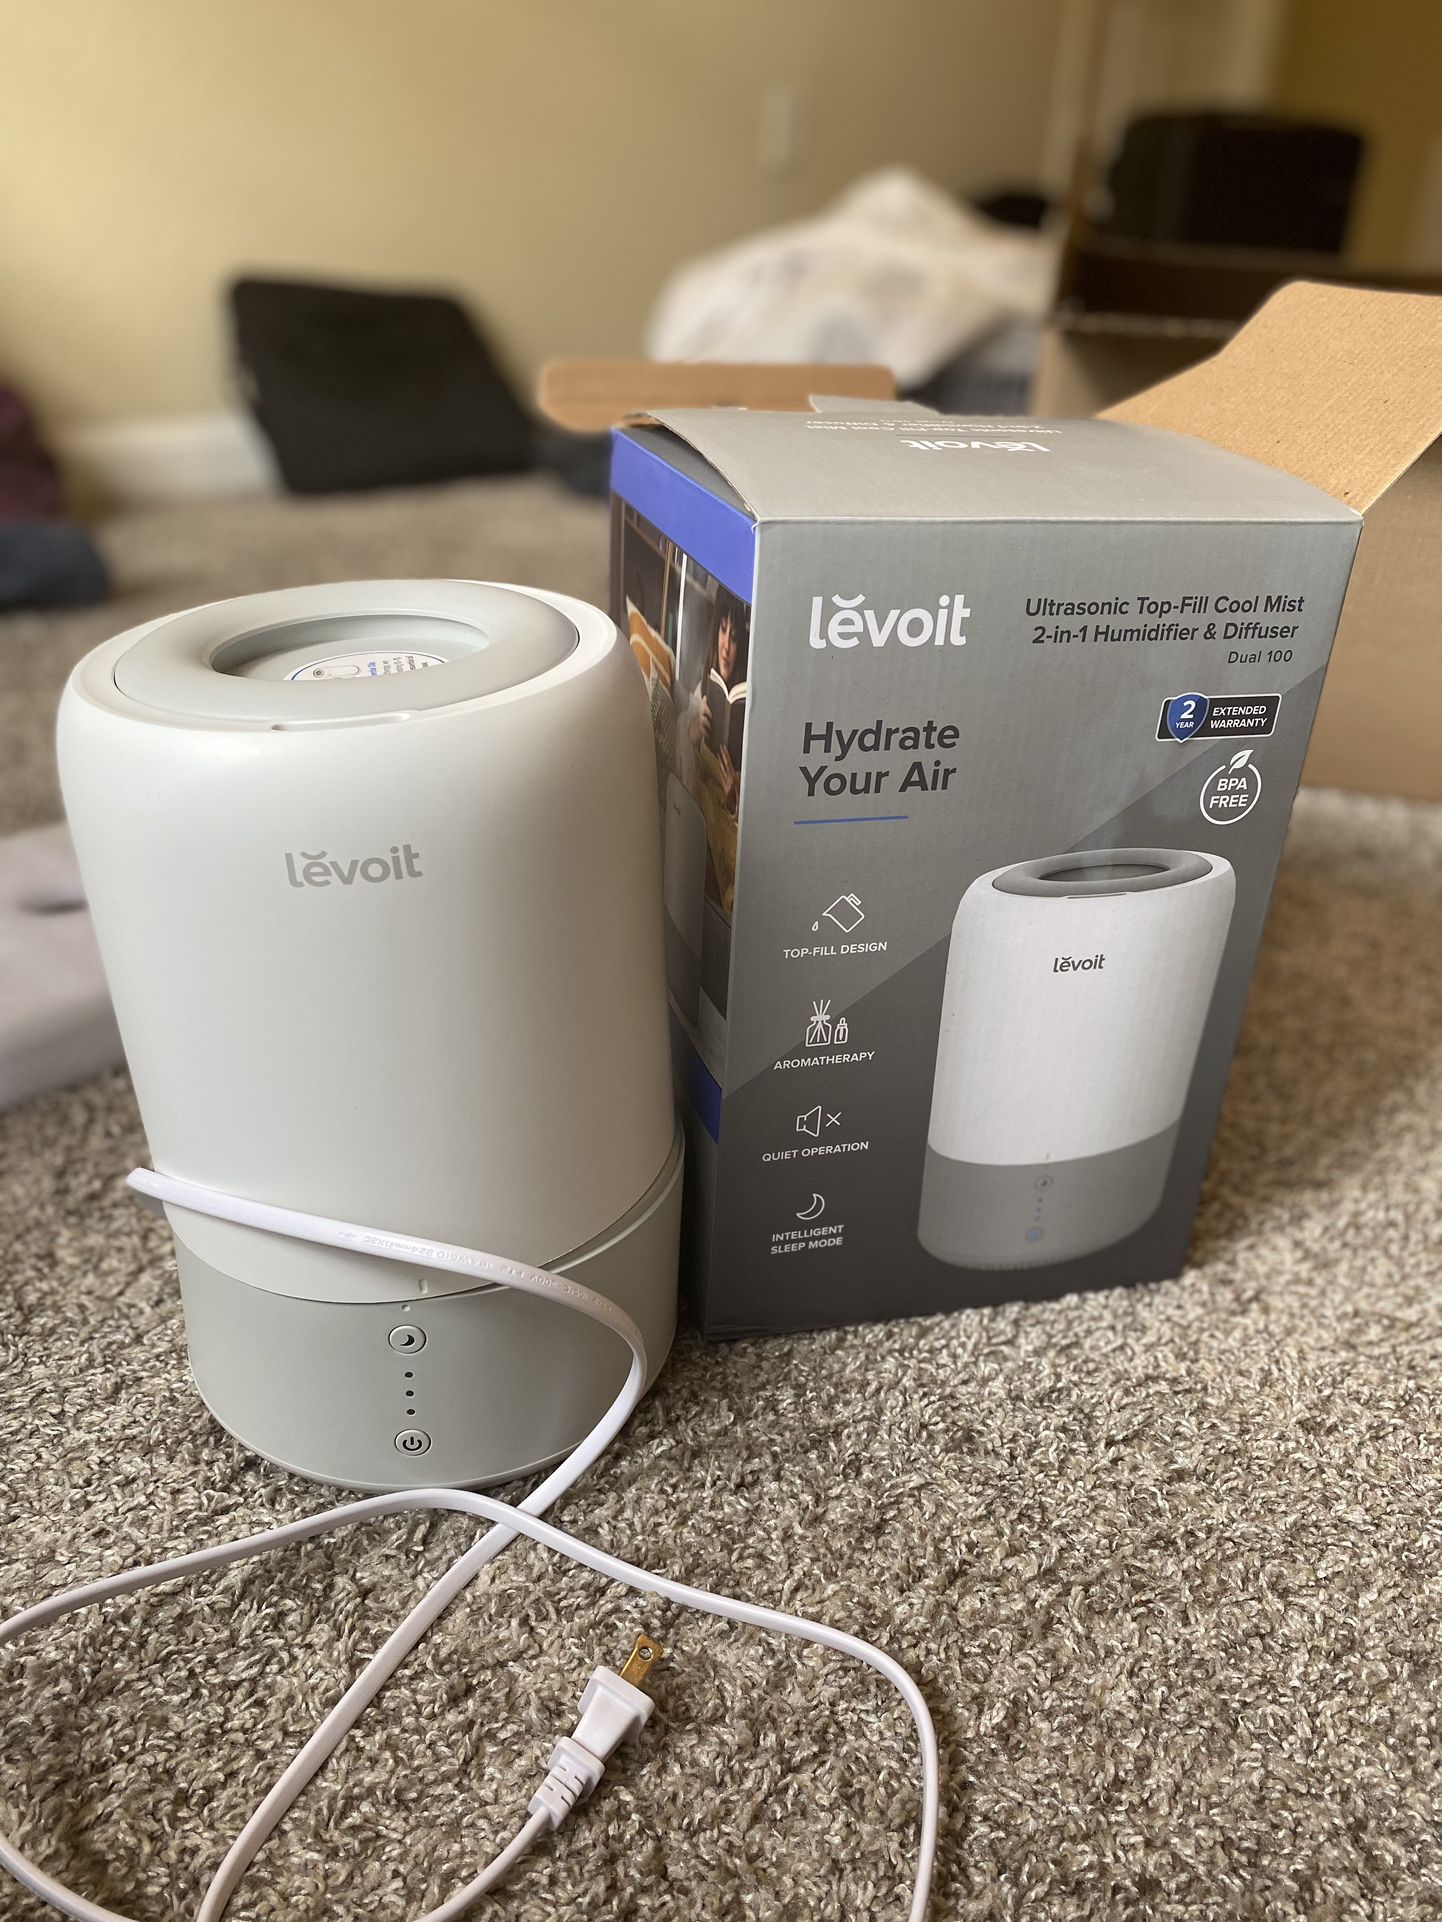 FREE Levoit Humidifier & Diffuser